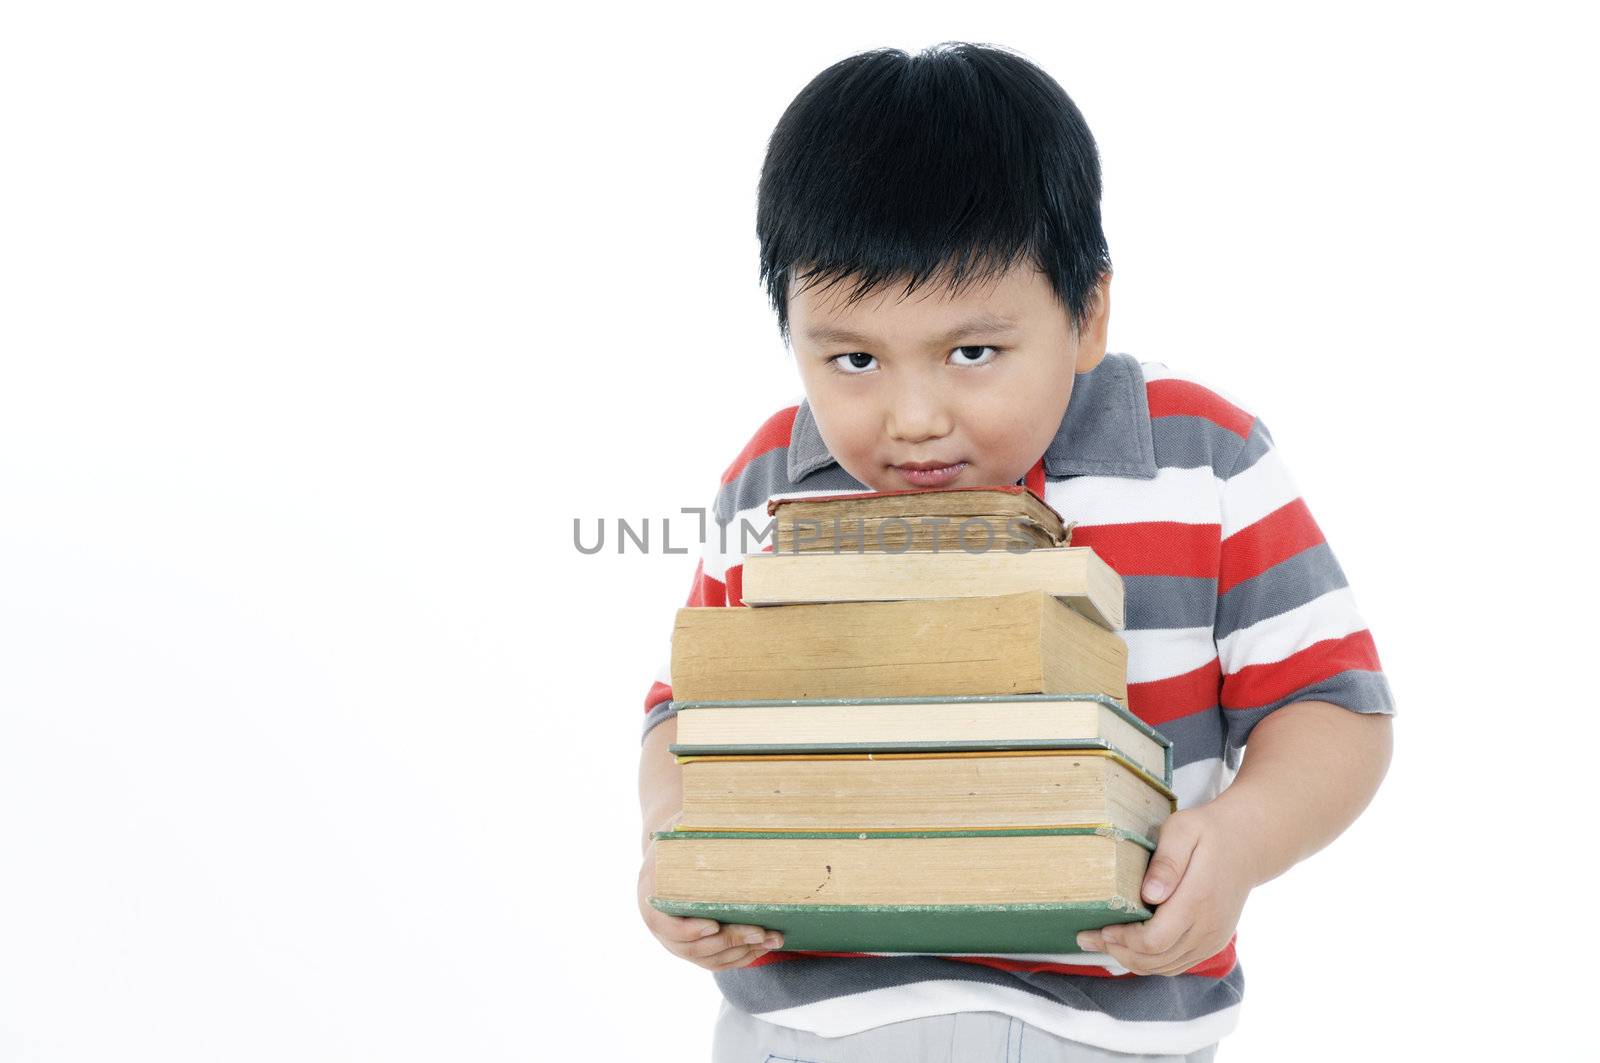 Portrait of an elementary schoolboy carrying a heavy pile of books over white background.